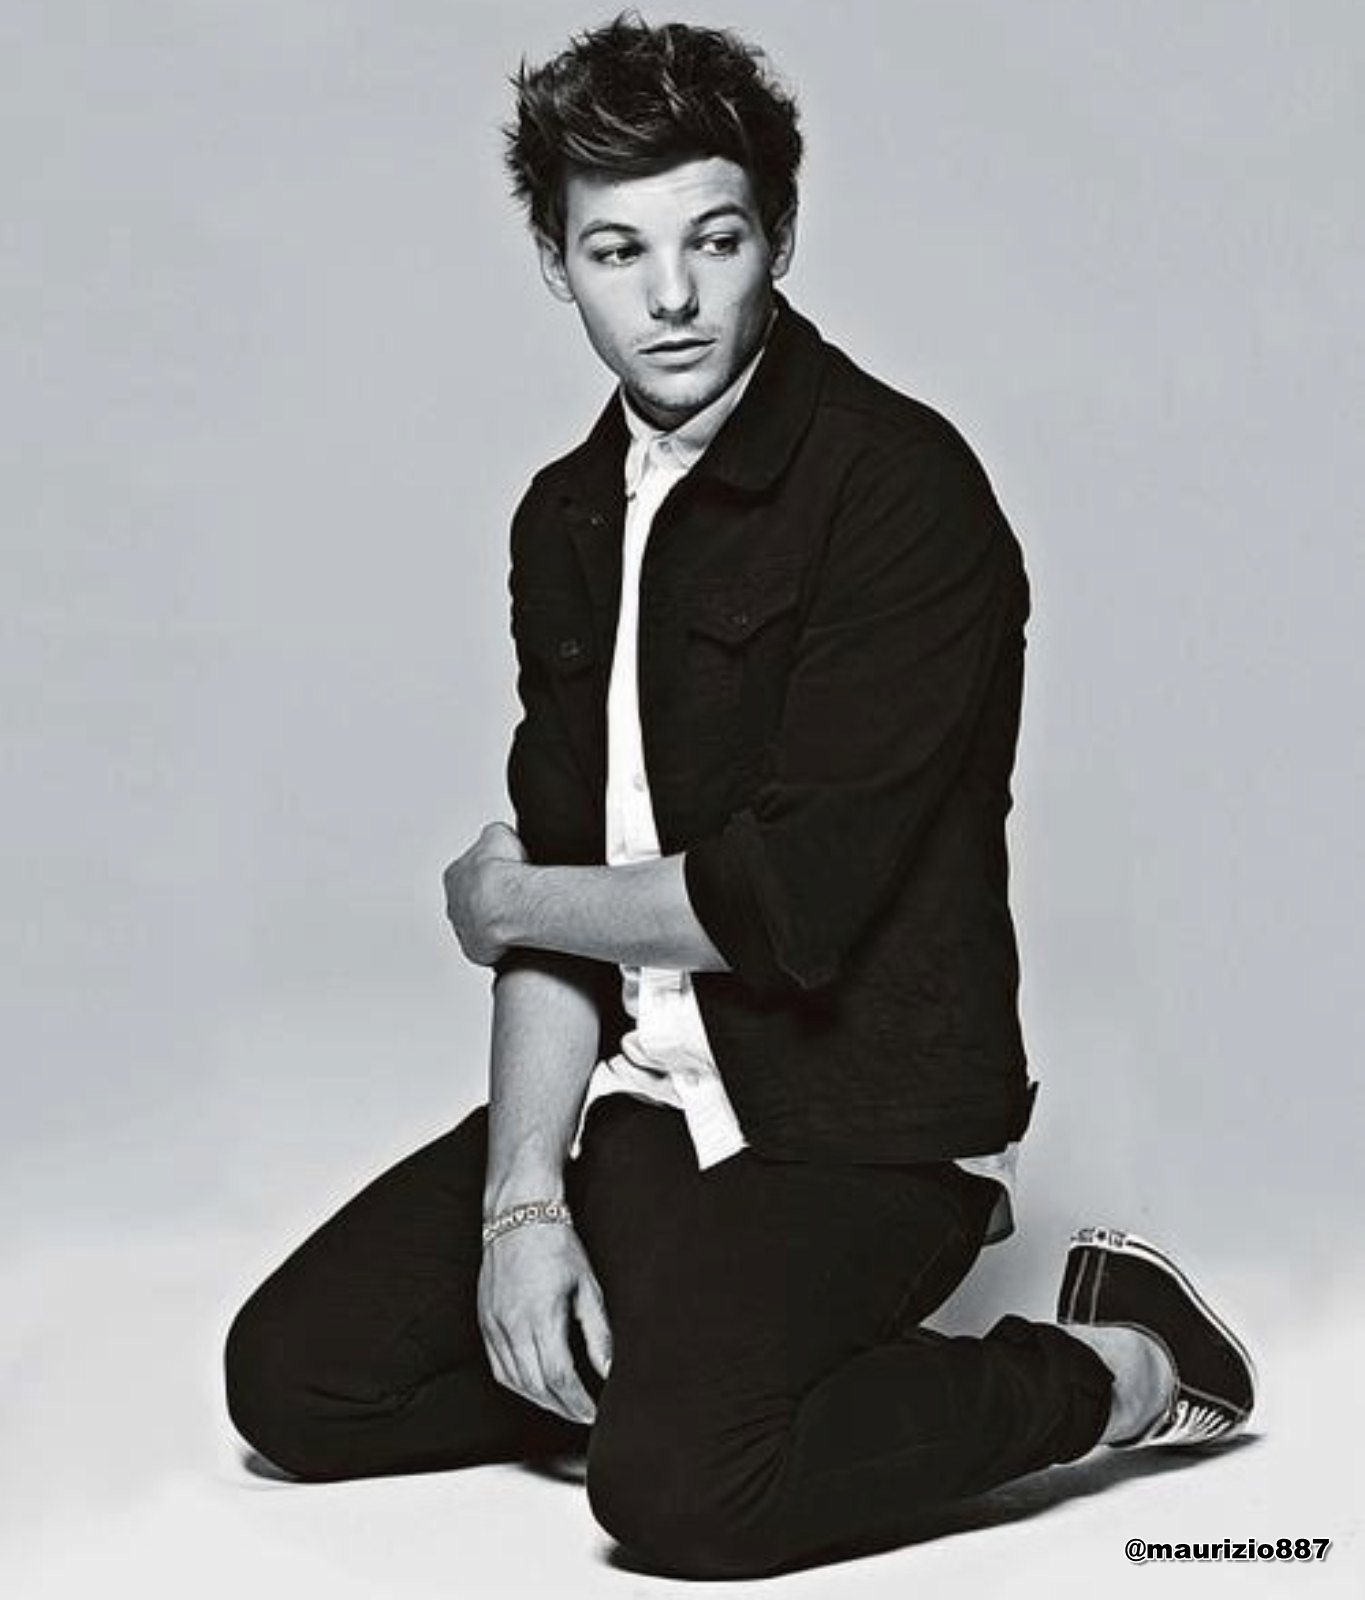 Louis Tomlinson | One direction fanfiction Wiki | FANDOM powered by Wikia